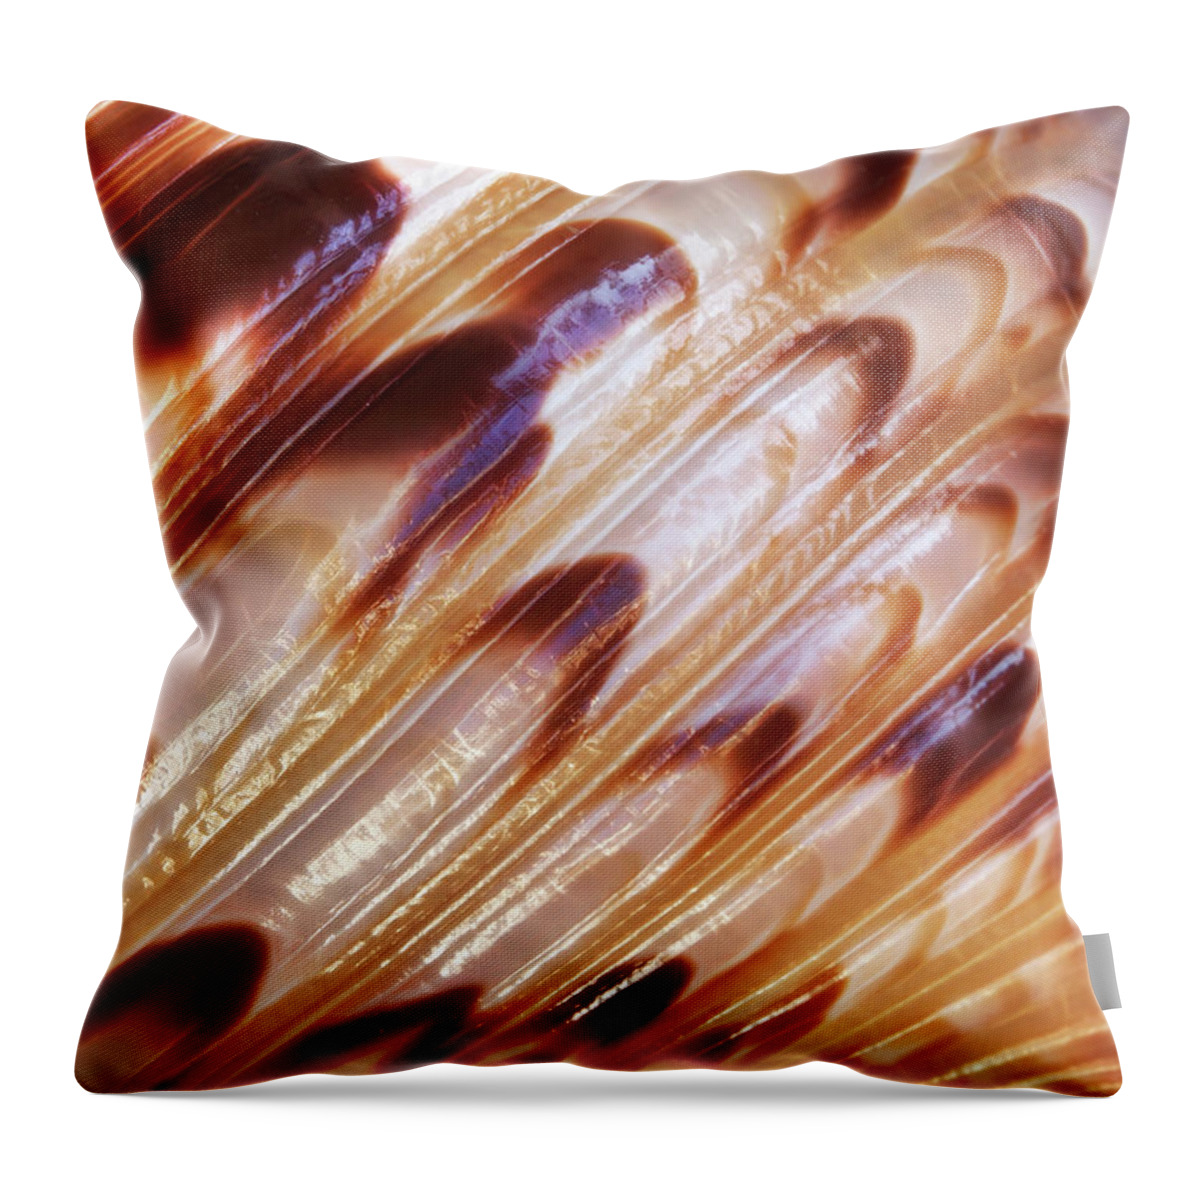 Seashell Abstract Throw Pillow featuring the photograph Triton Seashell Abstract by Gill Billington